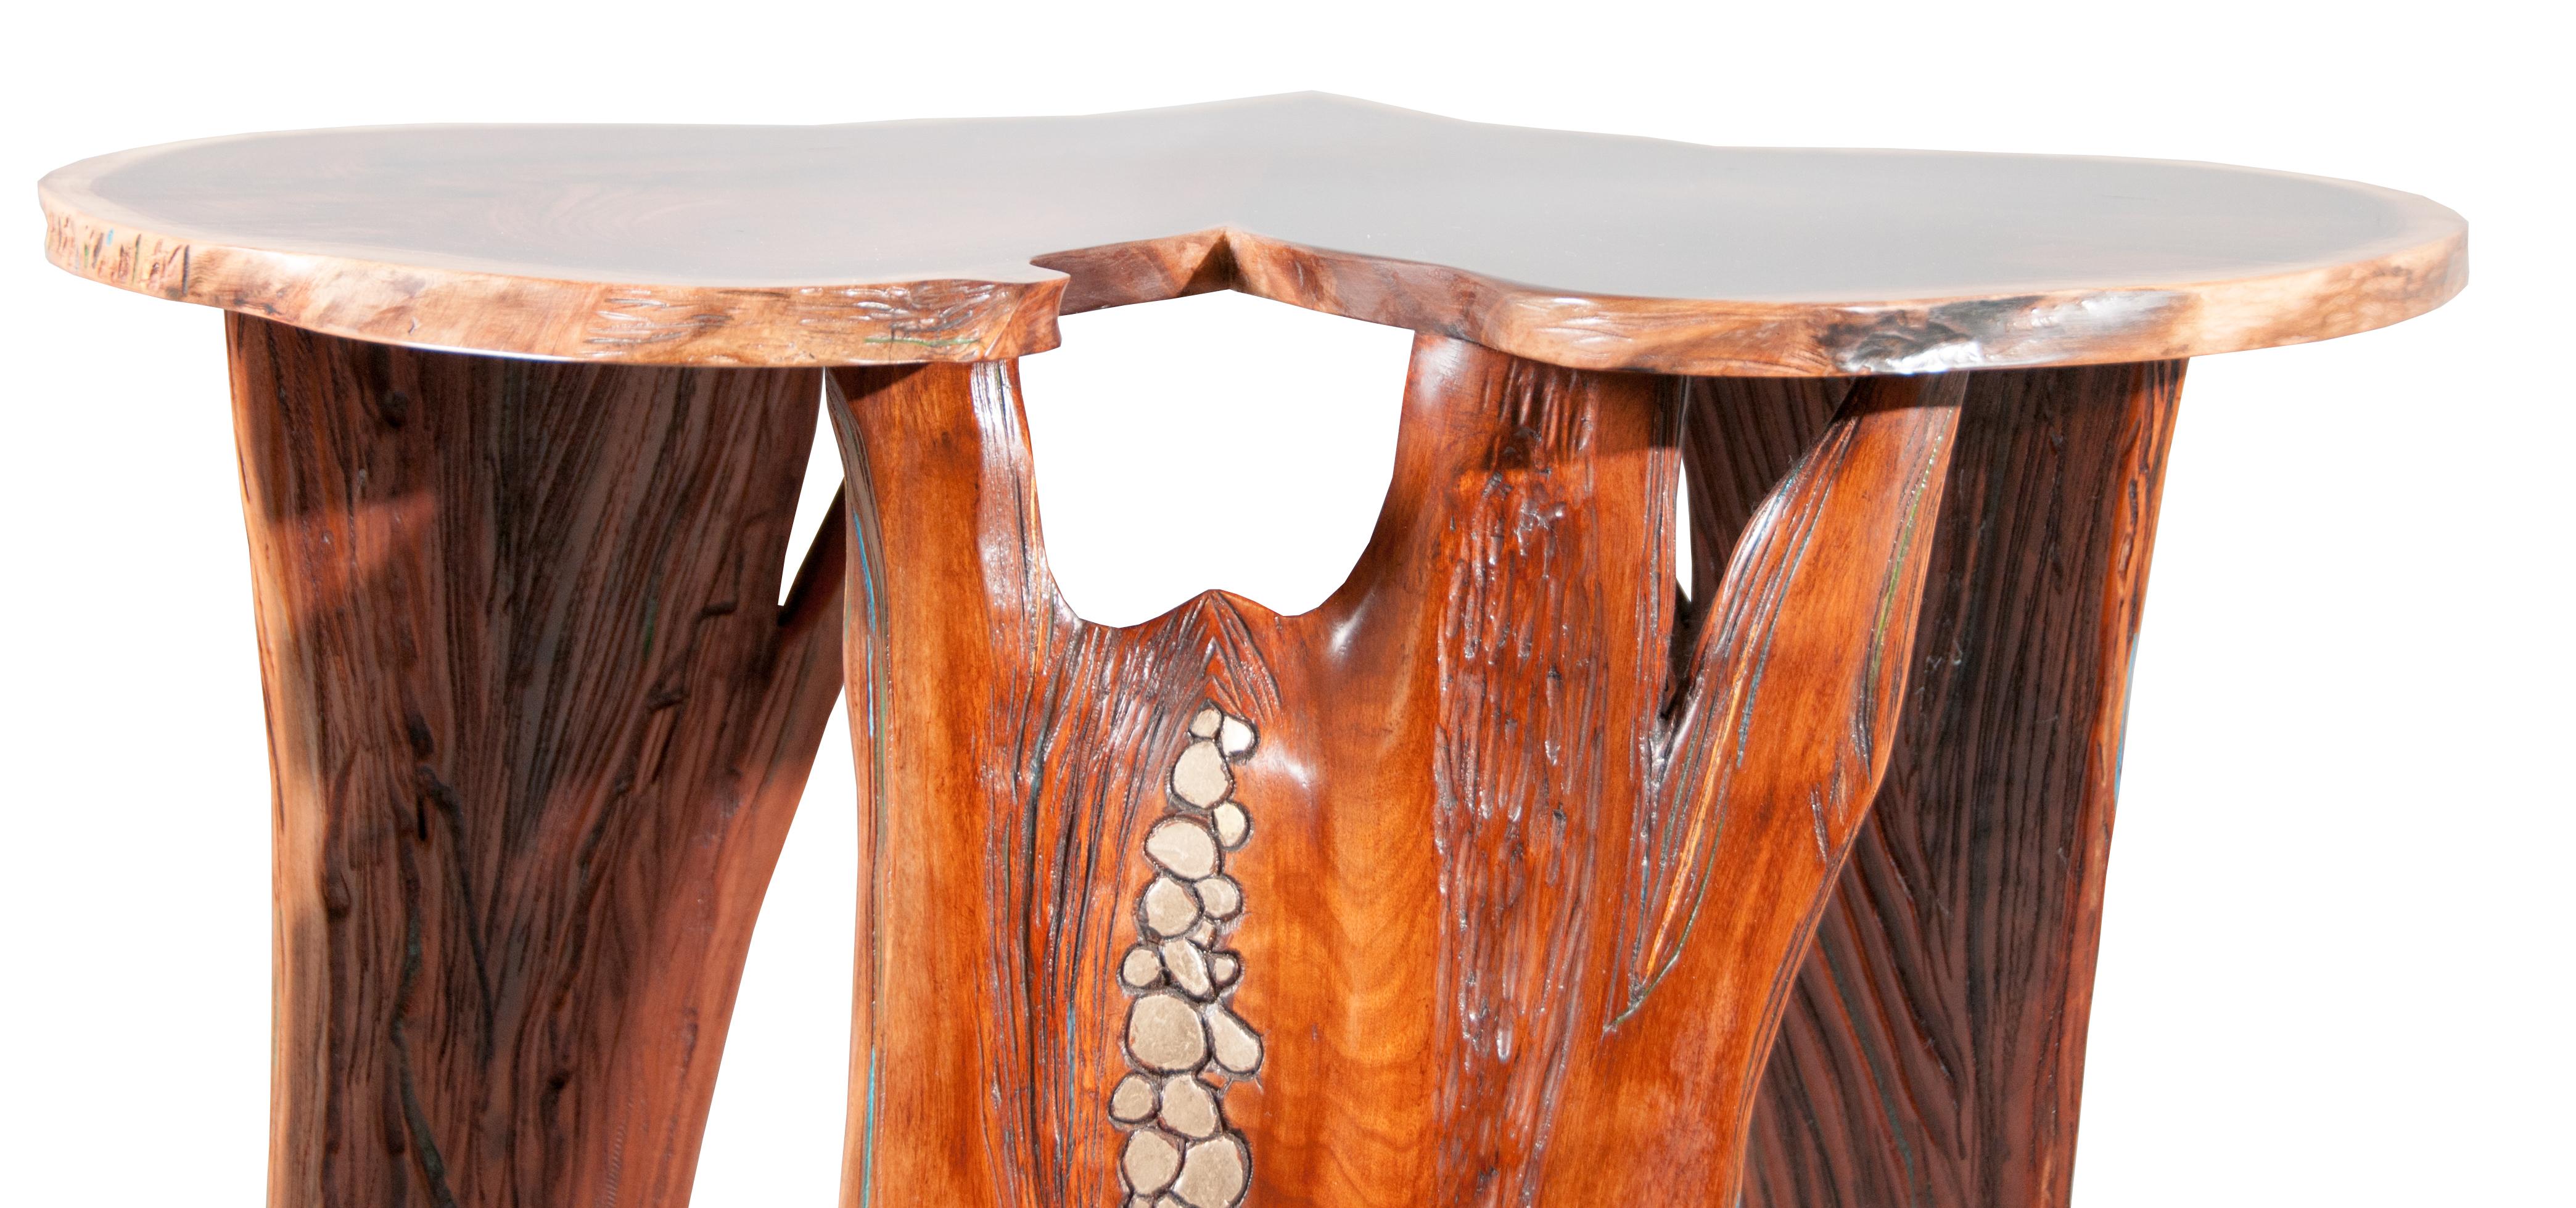 Sculptural Live Edge Walnut Occasional Table with Gilded and Carved Elements (Organische Moderne) im Angebot